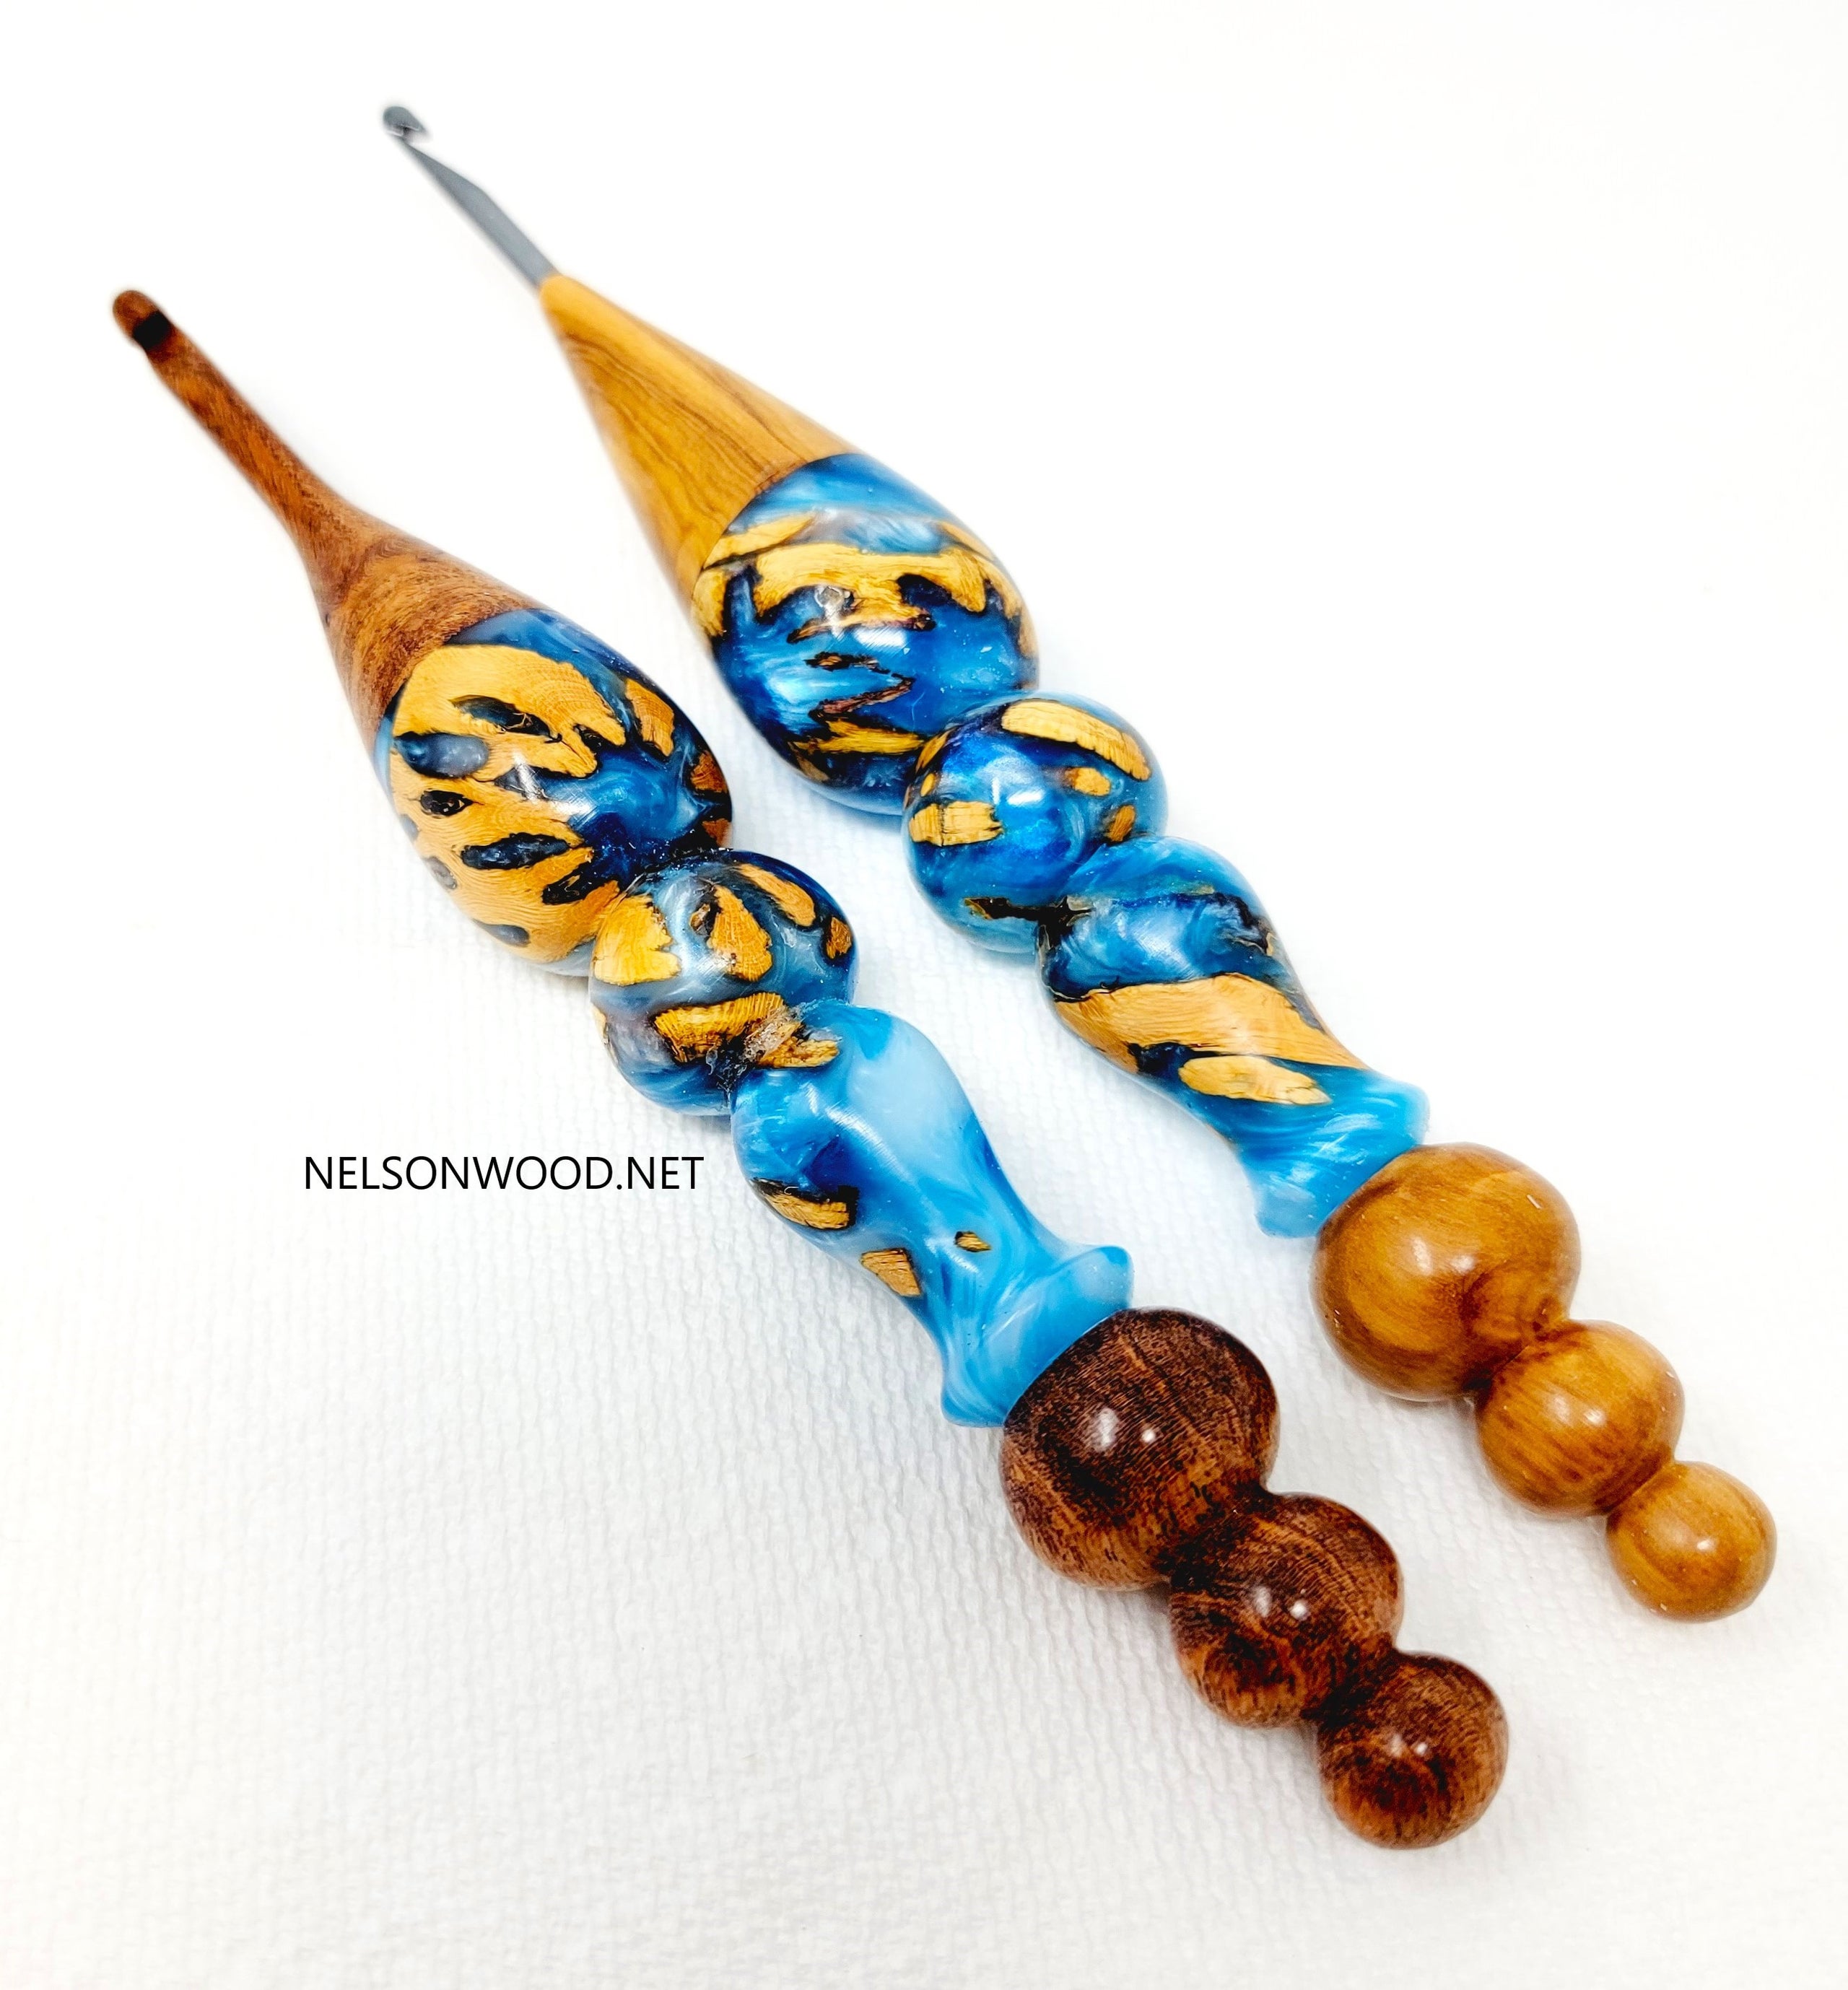 Cholla Wood Turquoise Snow Handcrafted Wood Crochet Hook Texas Artist Bryan  Nelson